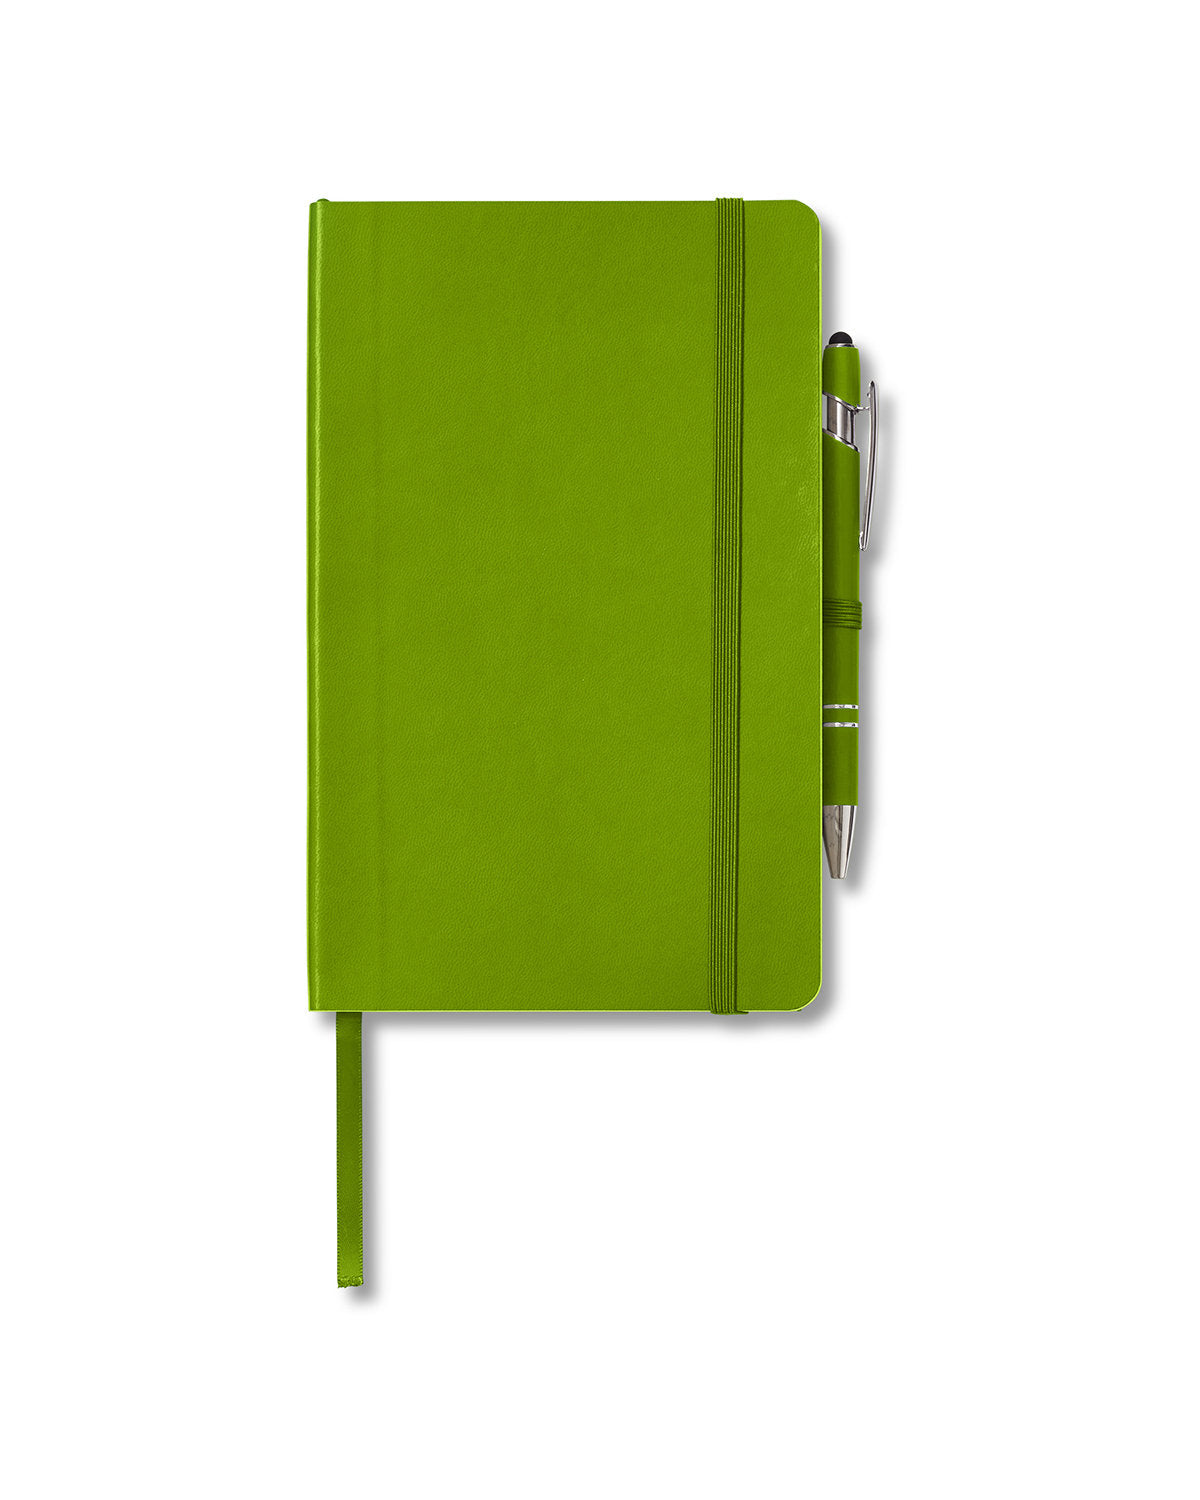 # Soft Cover Journal And Pen Set